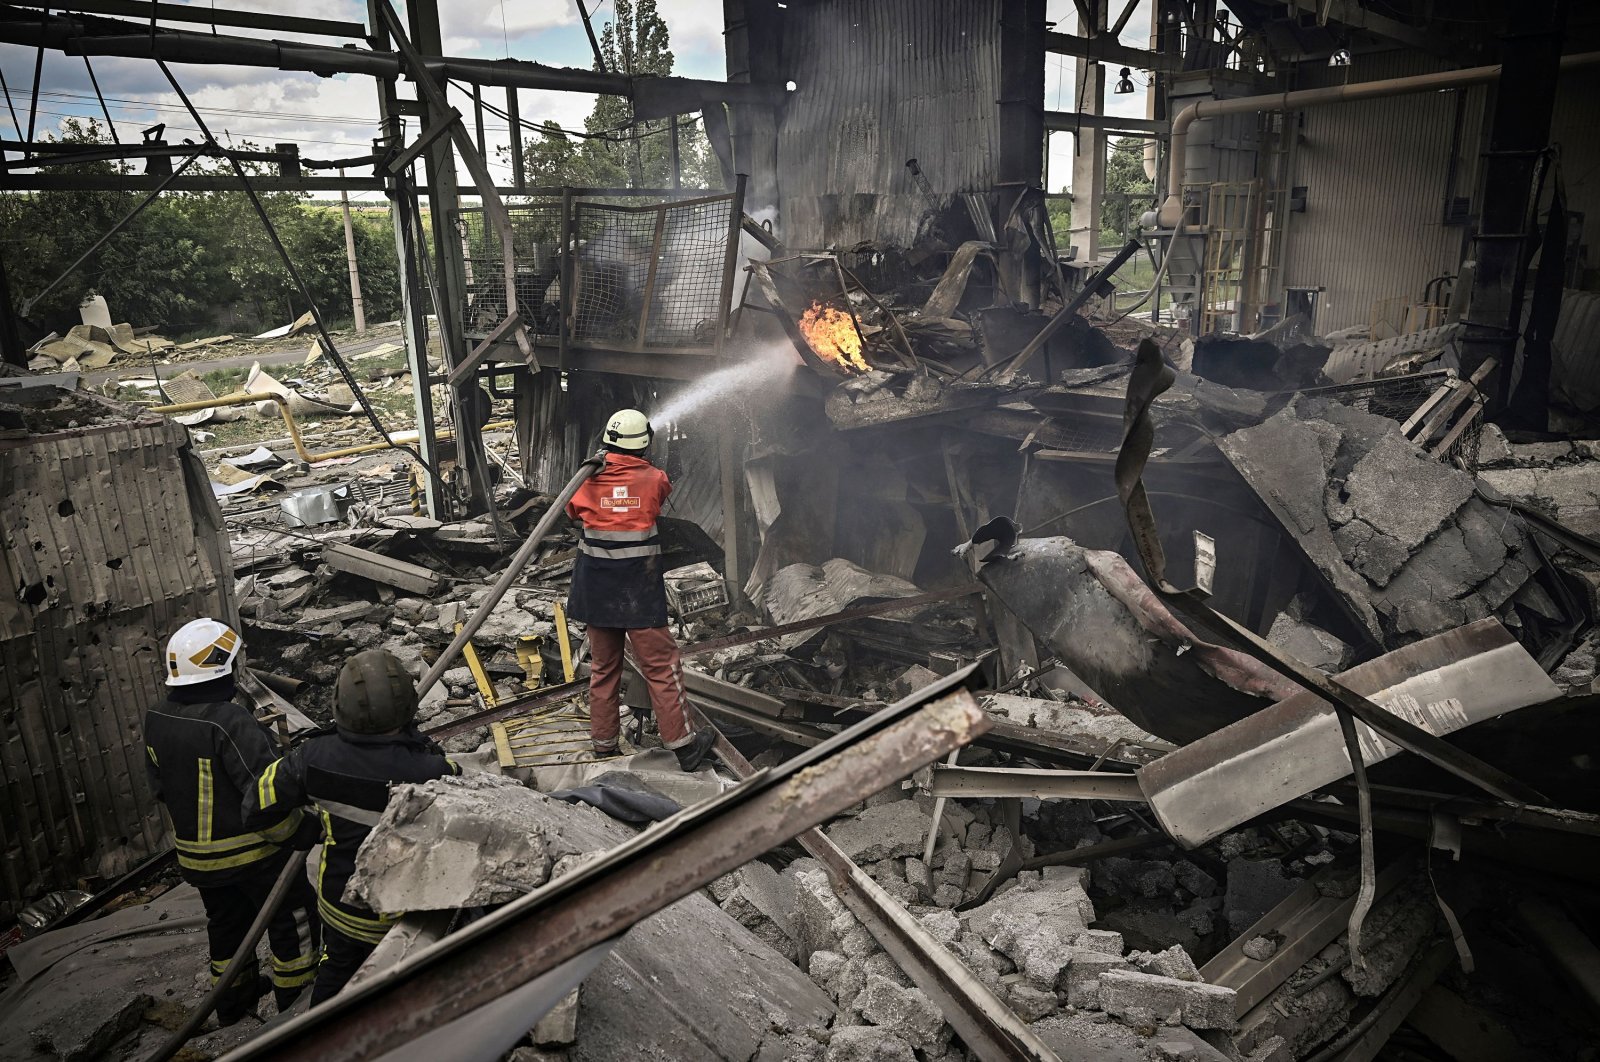 Firemen extinguish a fire at a Gypsum Manufactory plant after shelling in the city of Bakhmut at the eastern Ukrainian region of Donbas on May 27, 2022, on the 93rd day of the Russian invasion of Ukraine. - Russia on May 27, 2022 pressed its deadly offensive to capture key points in the eastern Donbas region of Ukraine, with more bombing of residential areas and pro-Moscow forces claiming the capture of a key town on the way to Kyiv-controlled territory. (Photo by Aris Messinis / AFP)